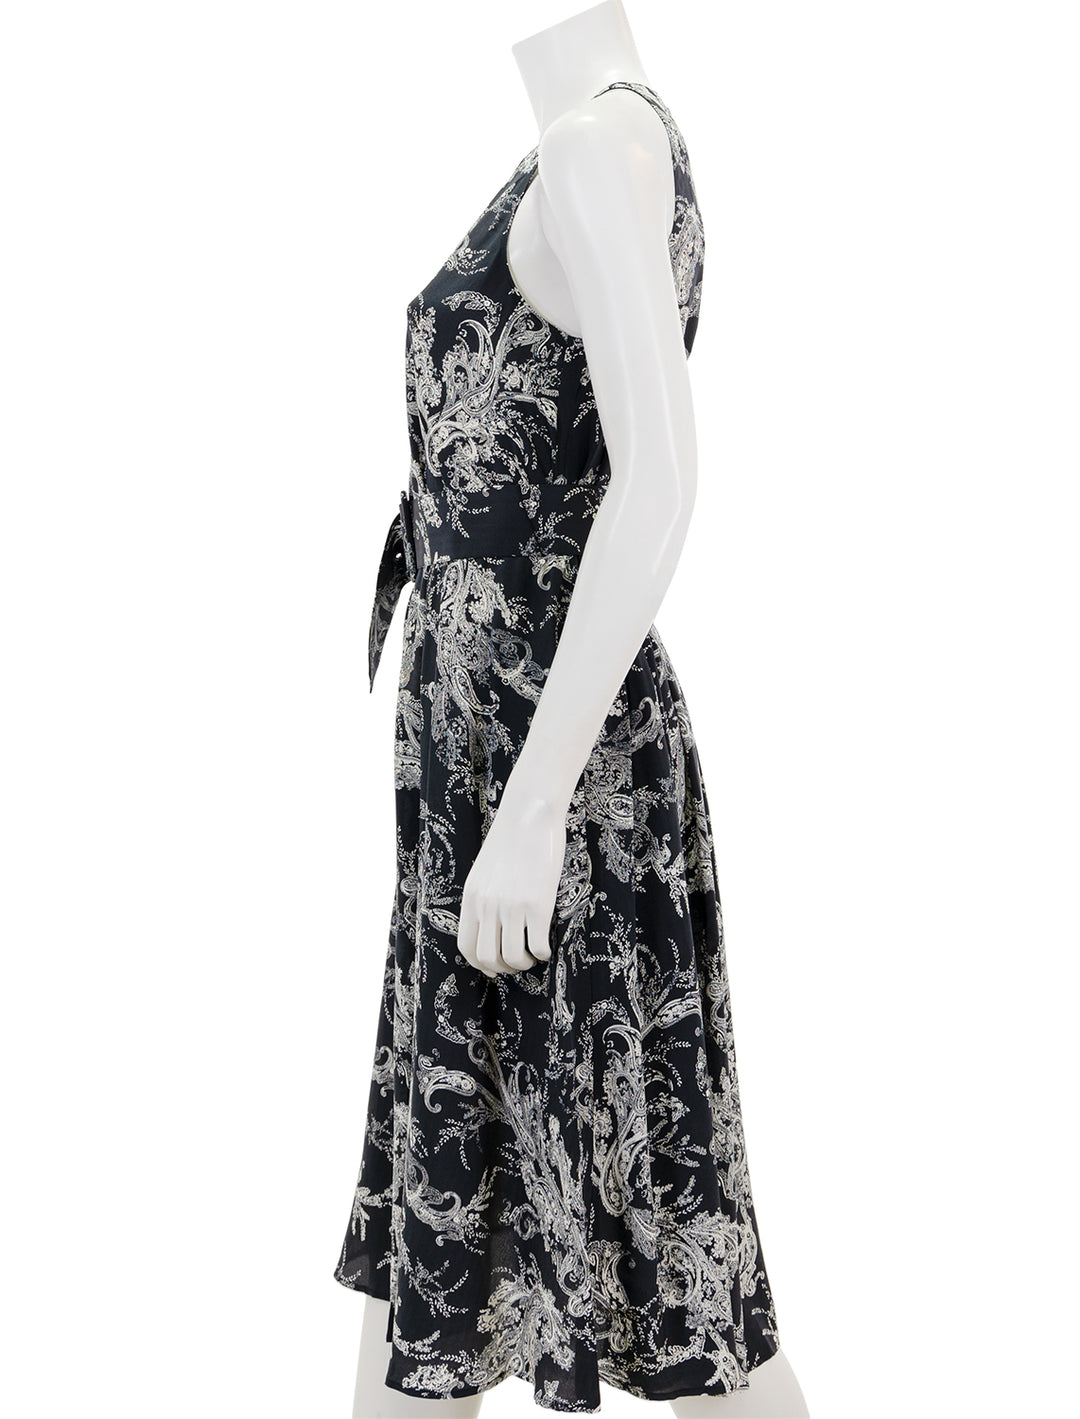 Side view of L'agence's vivian dress in sketch paisley print.